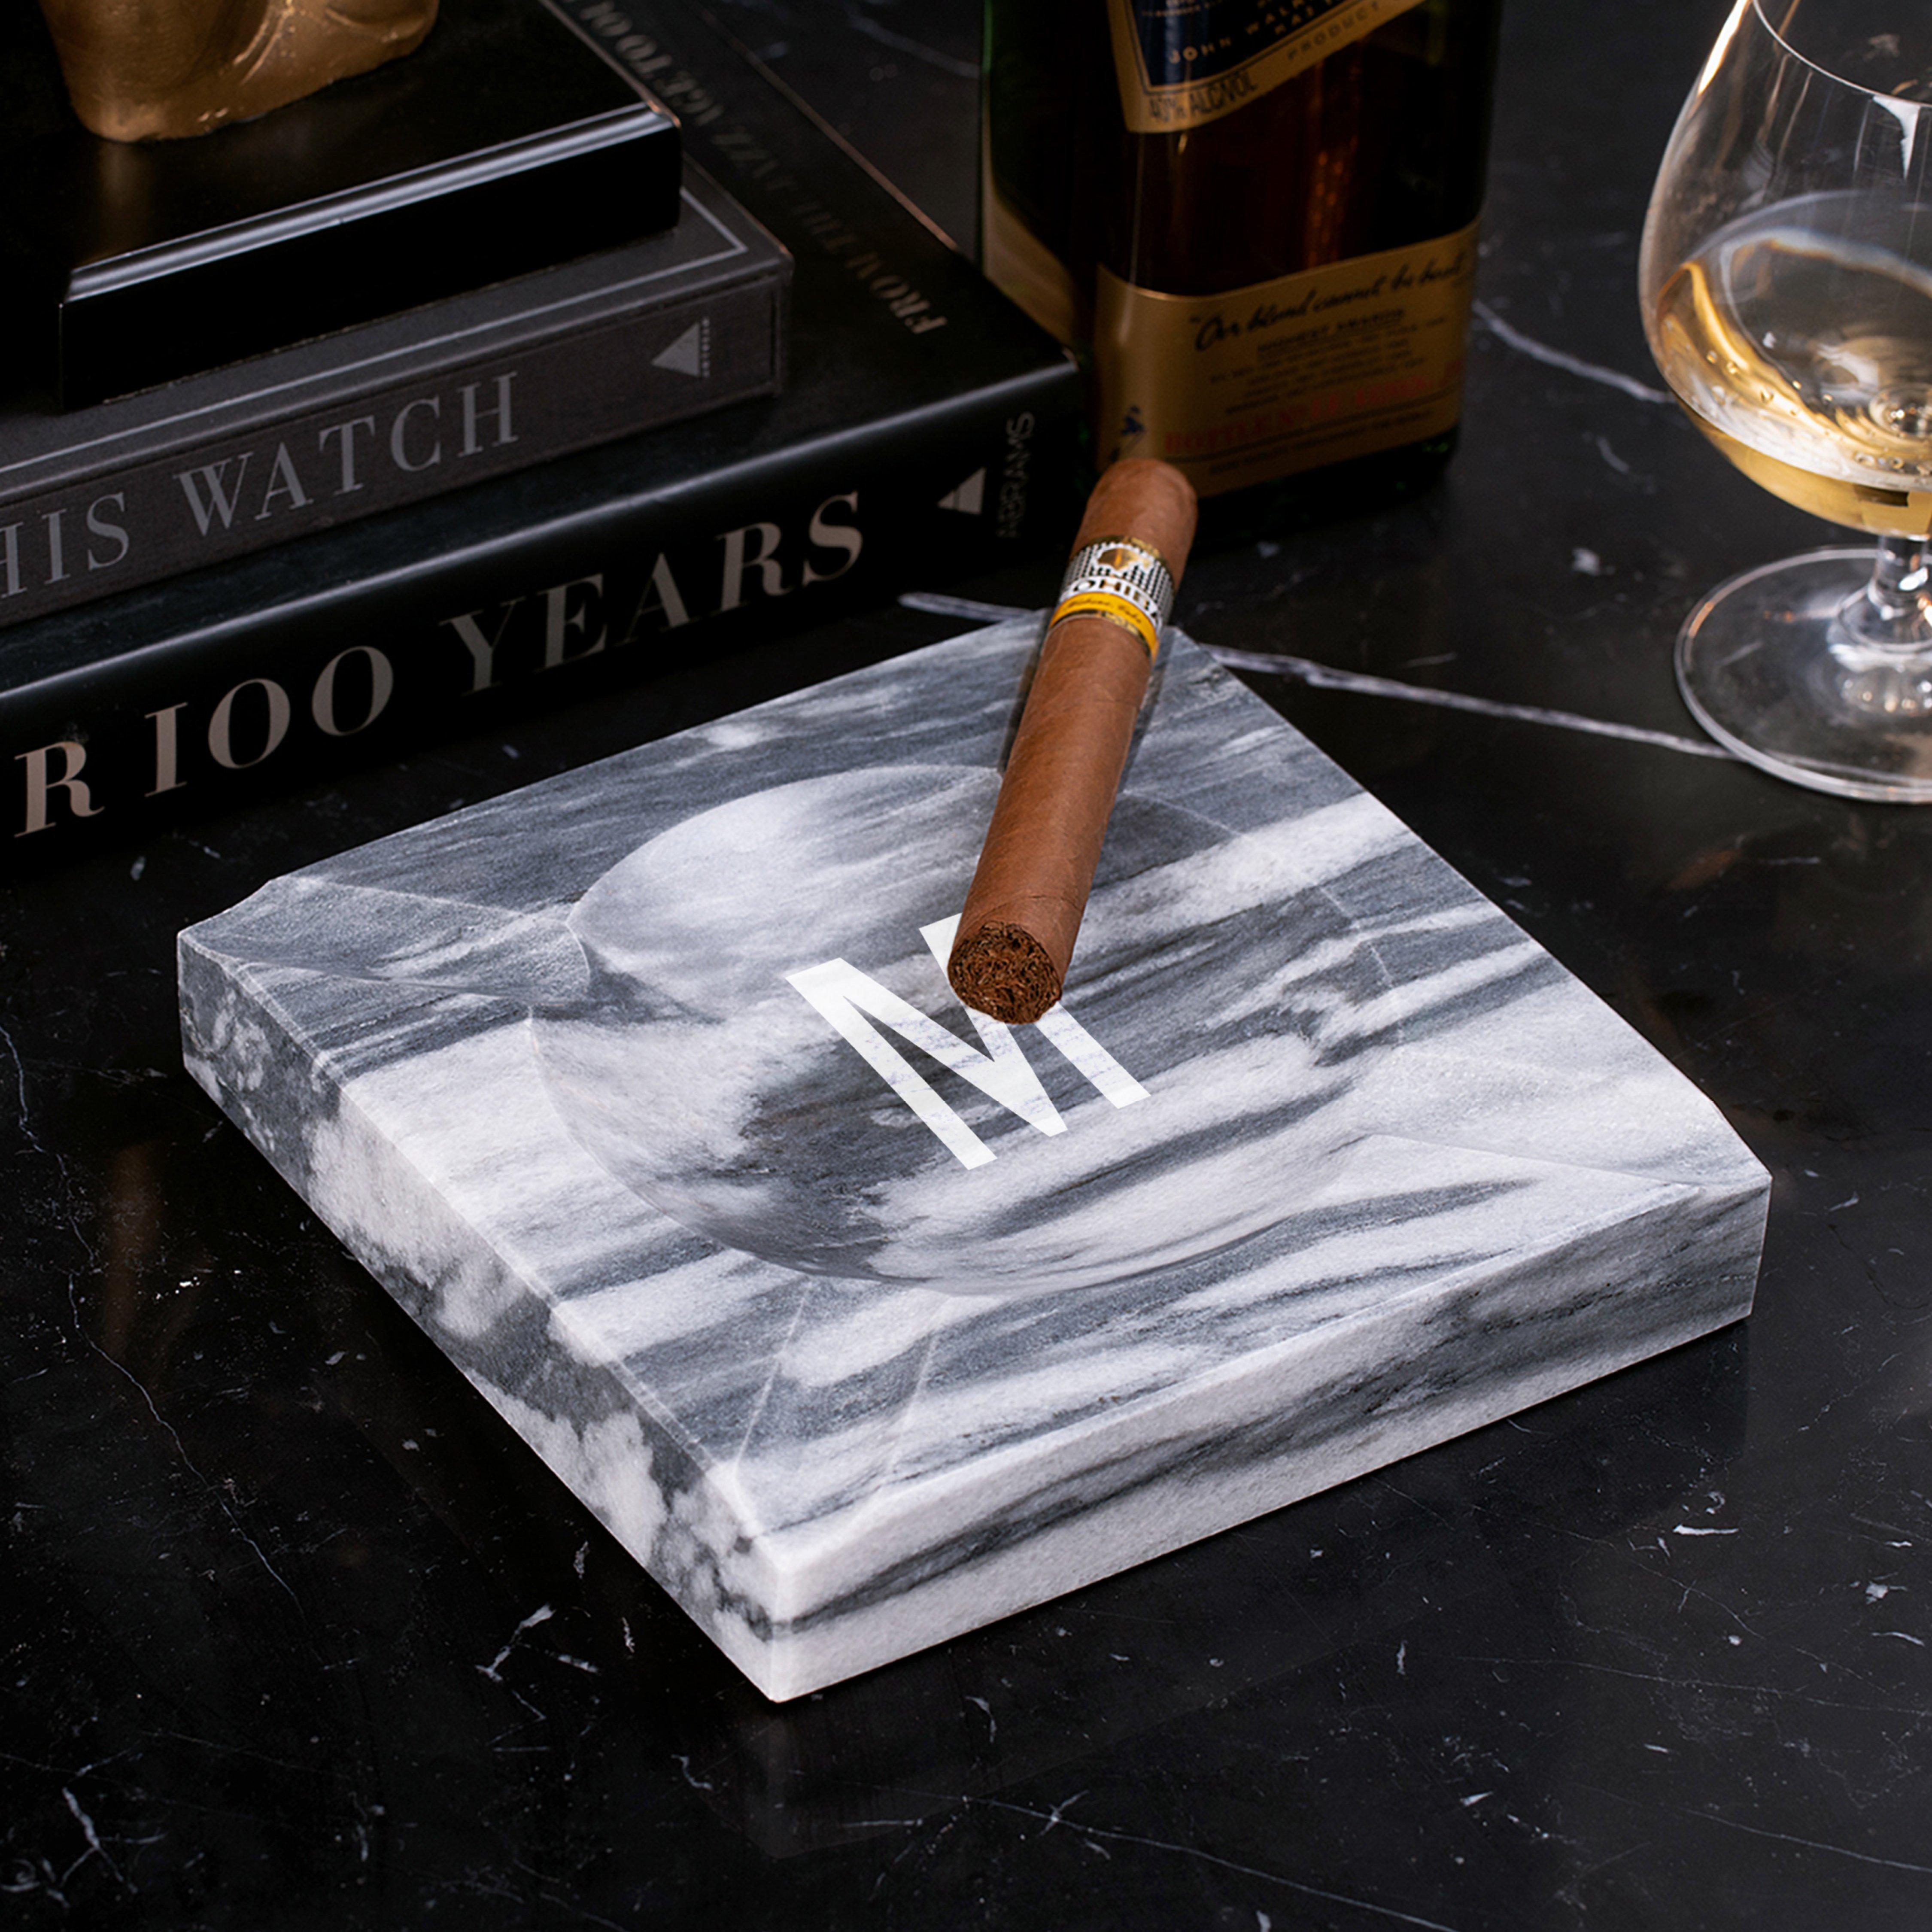 Single Barrel Whiskey Coaster and Ashtray - Not Personalized by Wine Enthusiast